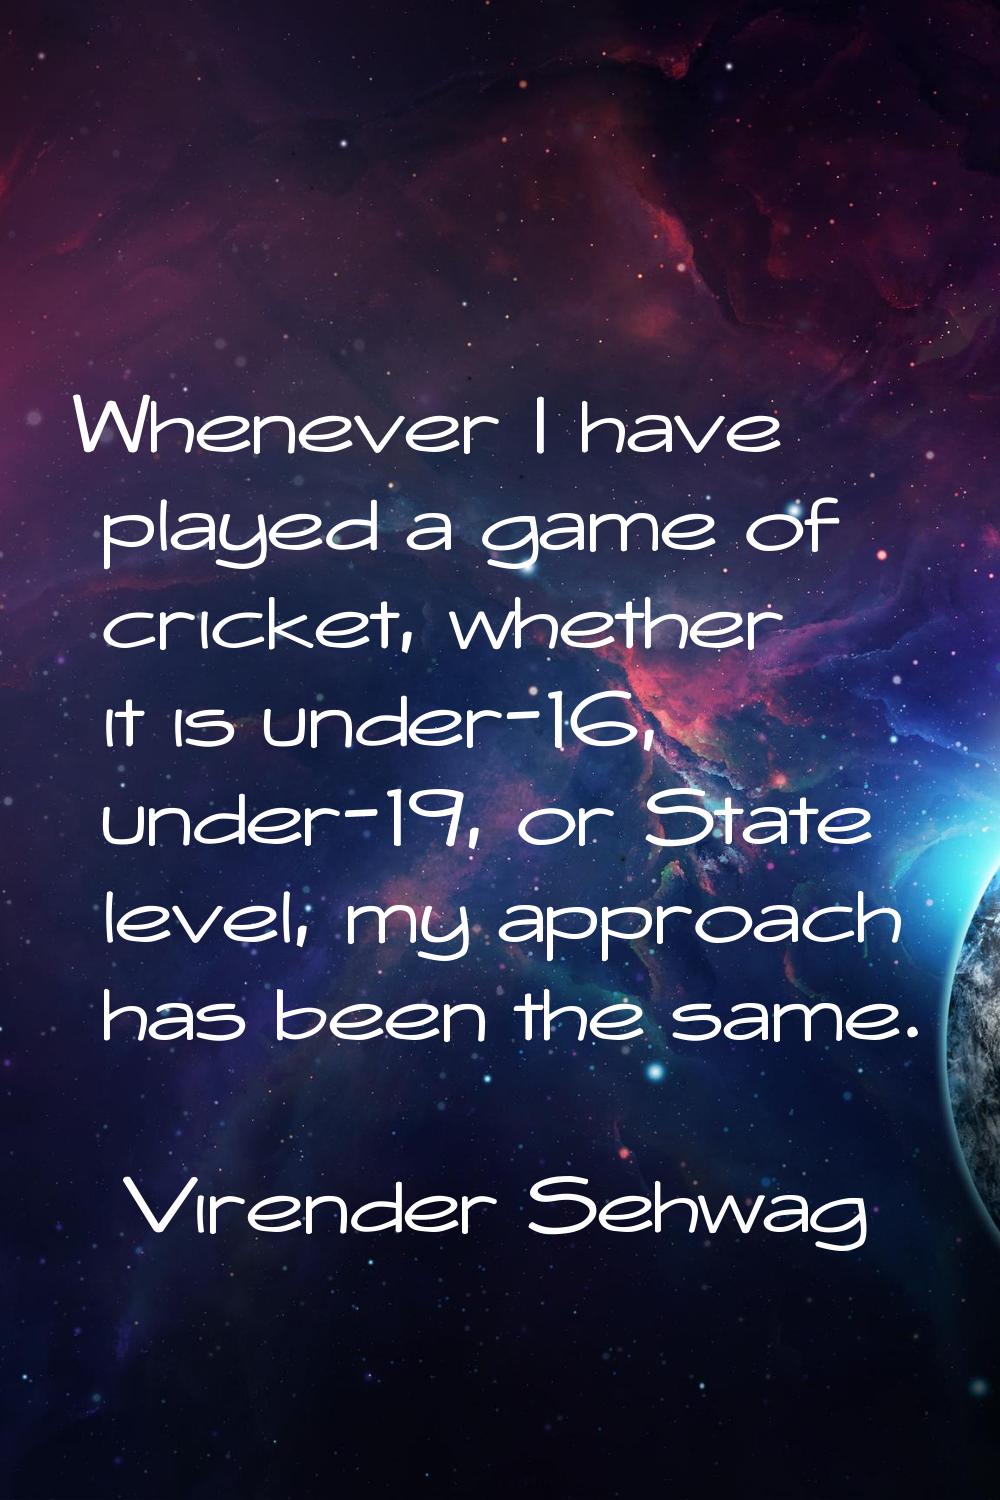 Whenever I have played a game of cricket, whether it is under-16, under-19, or State level, my appr